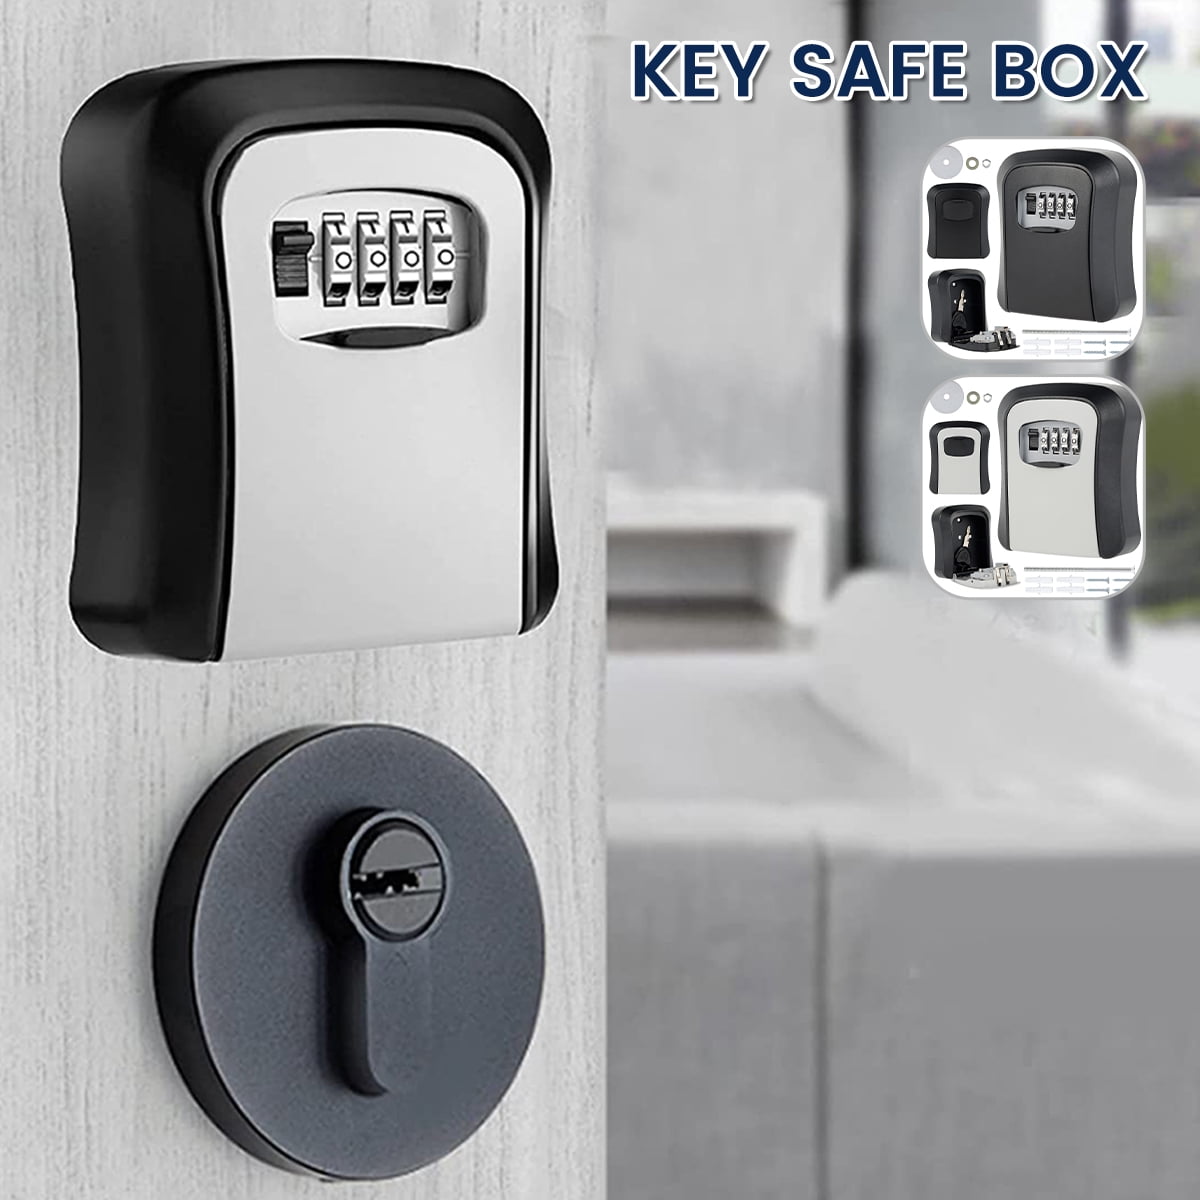 ASEC High Security OUTDOOR KEY SAFE BOX Wall Mount Outside COMBINATION Key LOCK 